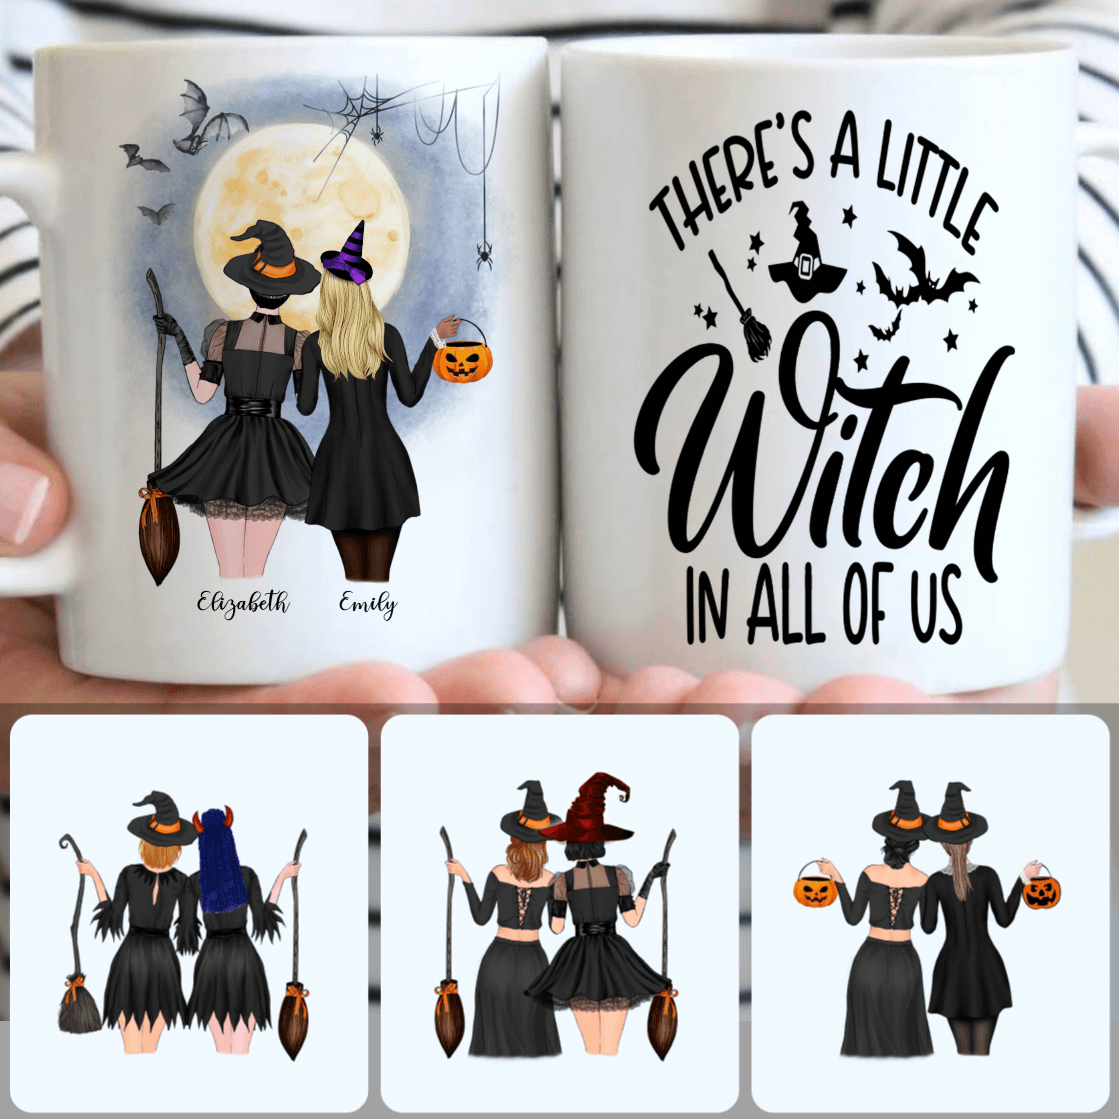 Personalized Mug, Best Halloween Gifts, 2 Sisters - A Little Witch Customized Coffee Mug With Names